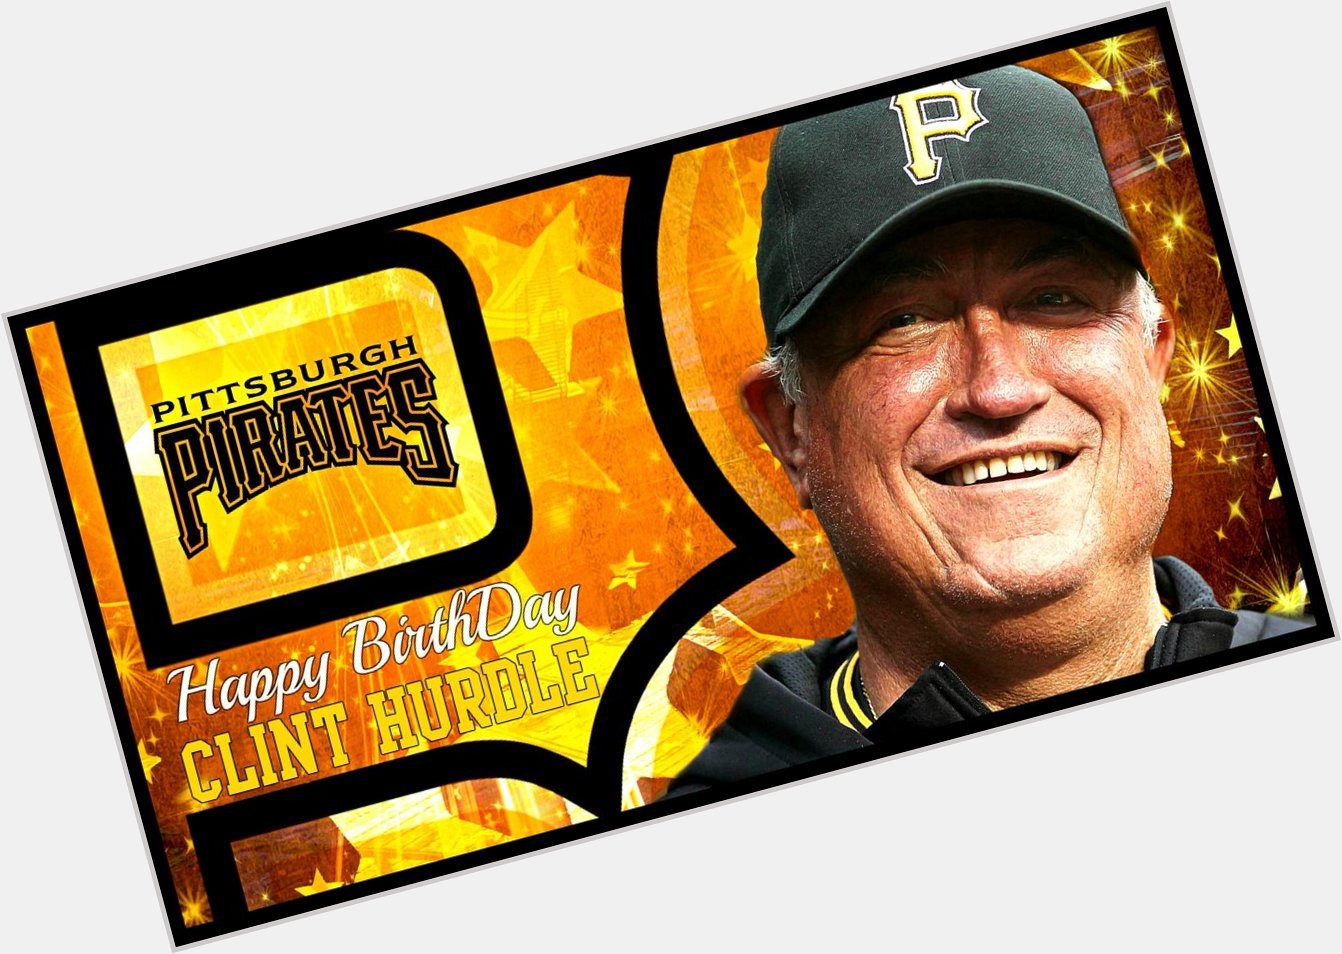 Wishing Pirates manager Clint Hurdle a Happy BDay! We hope this is the start of your greatest, most wonderful year! 